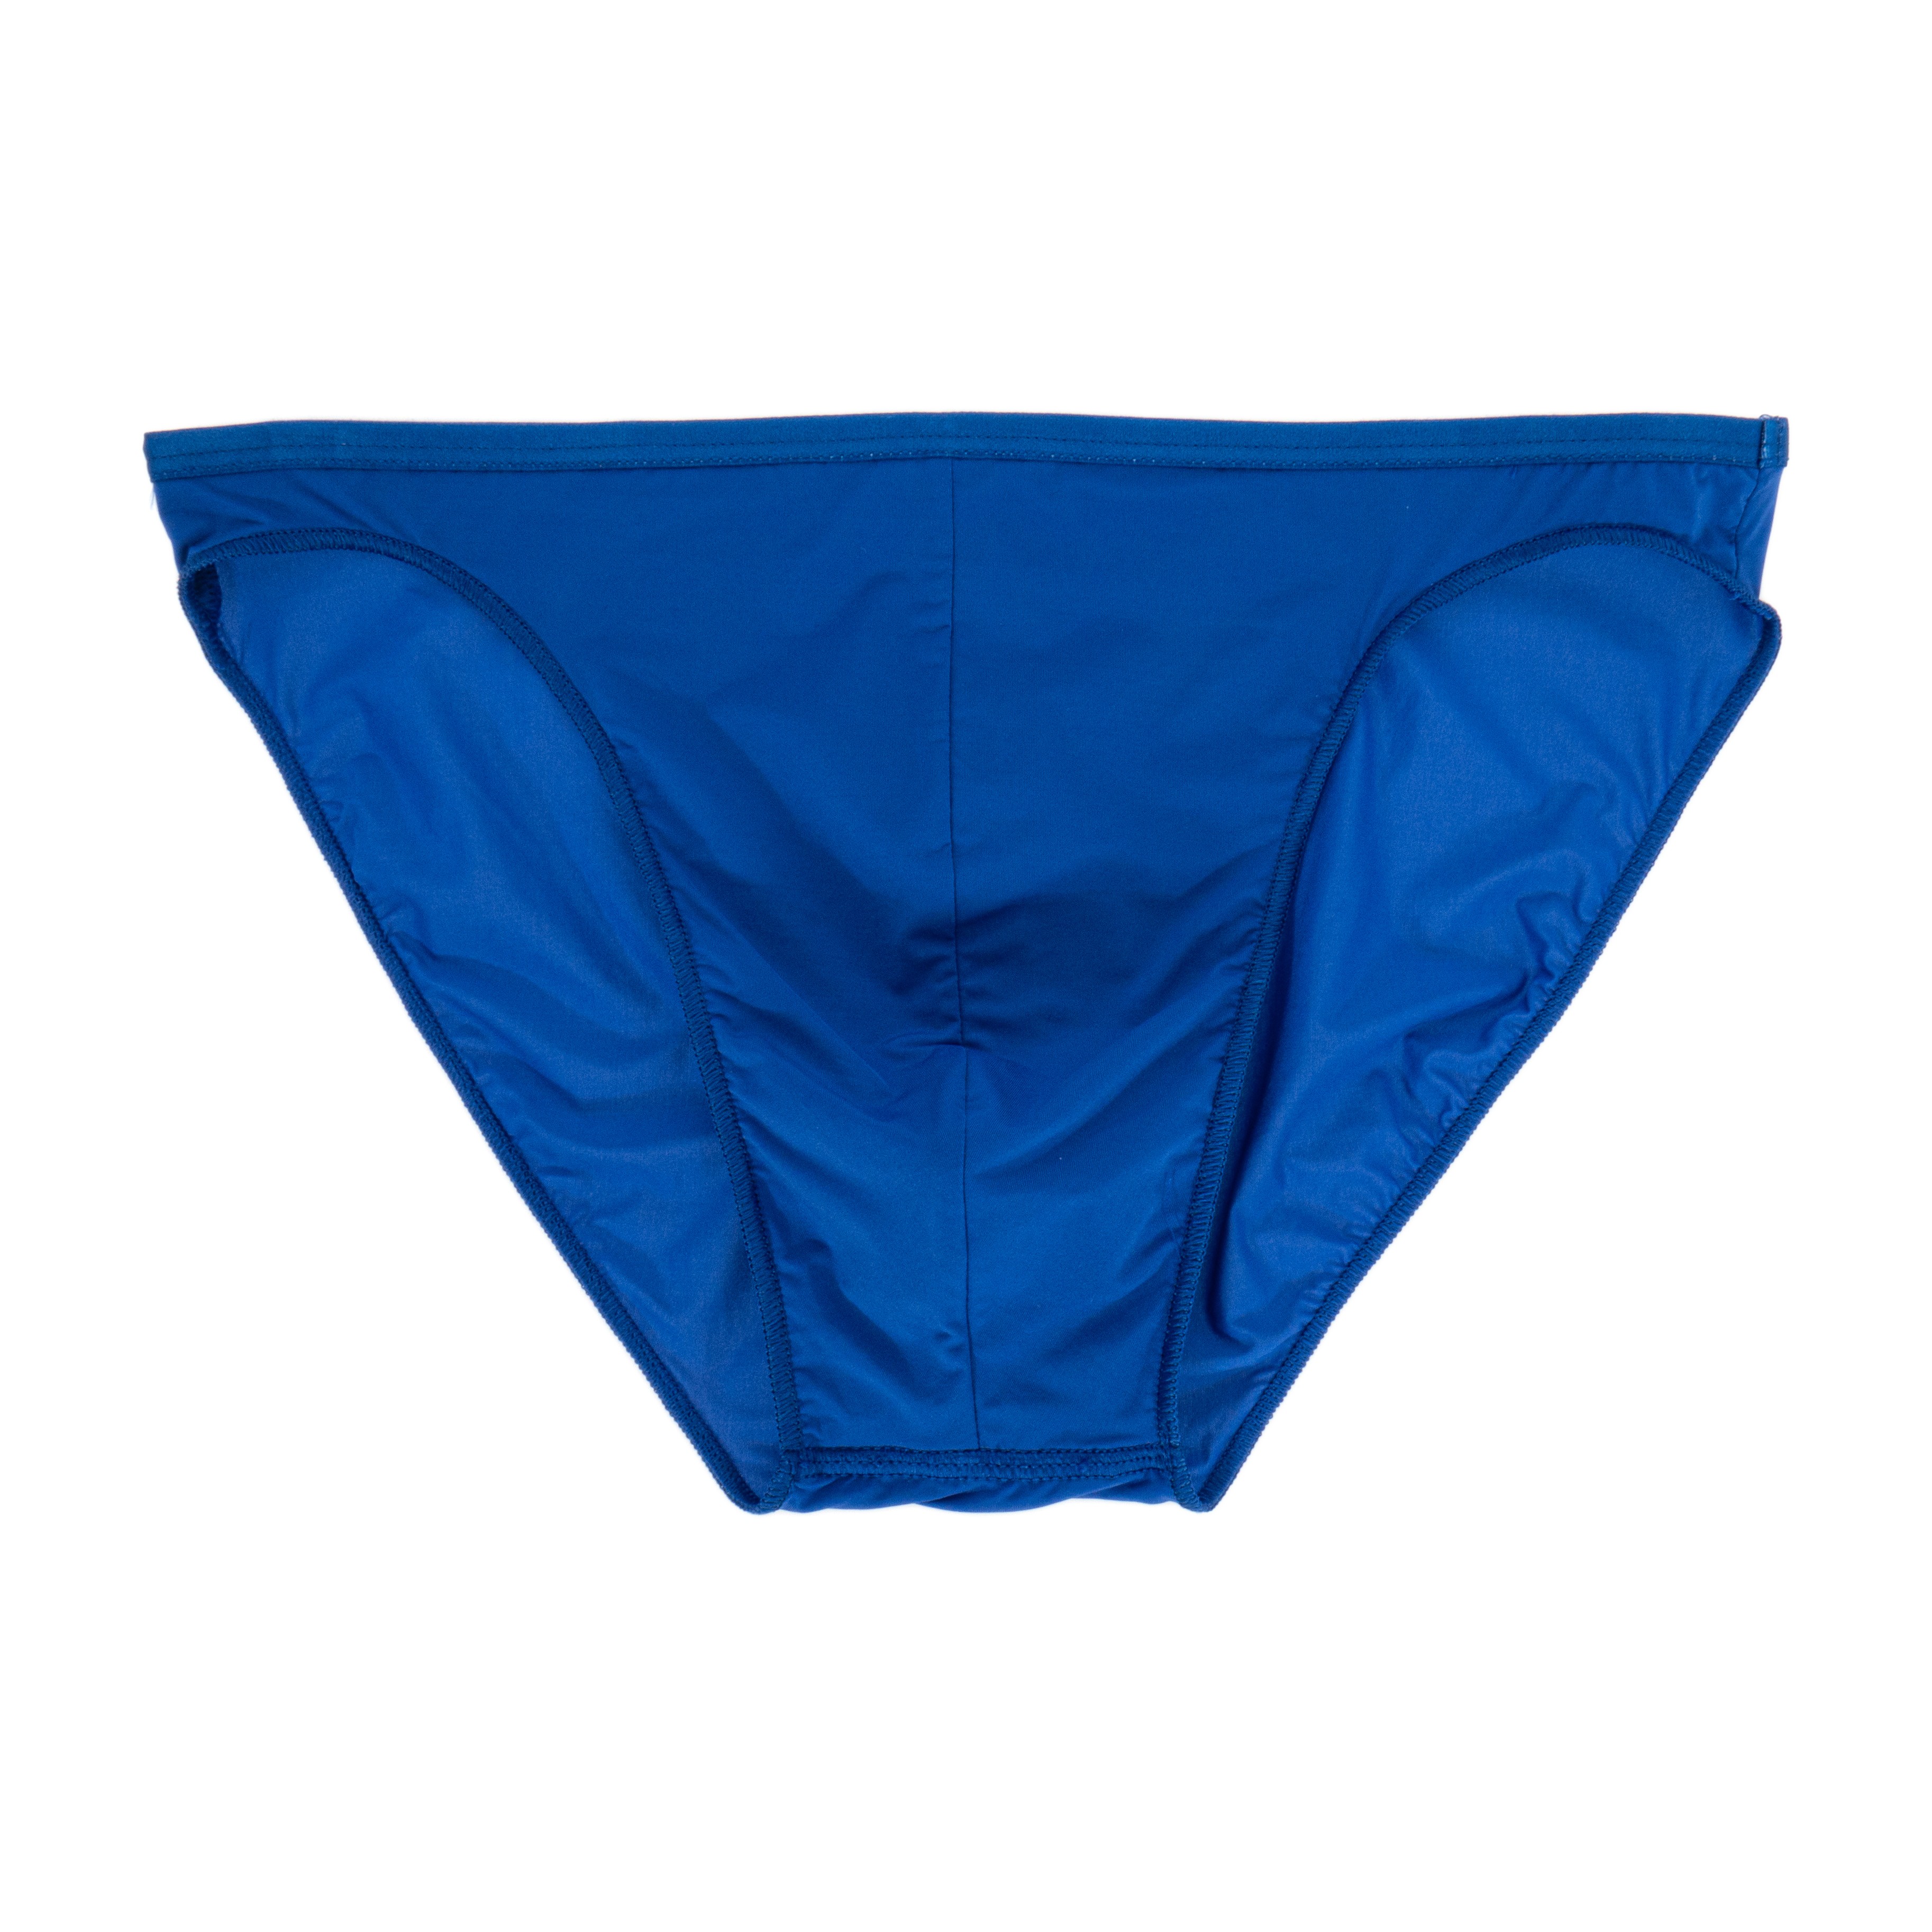 Slip micro Feathers - blue: Underwear for man brand HOM for sale on...